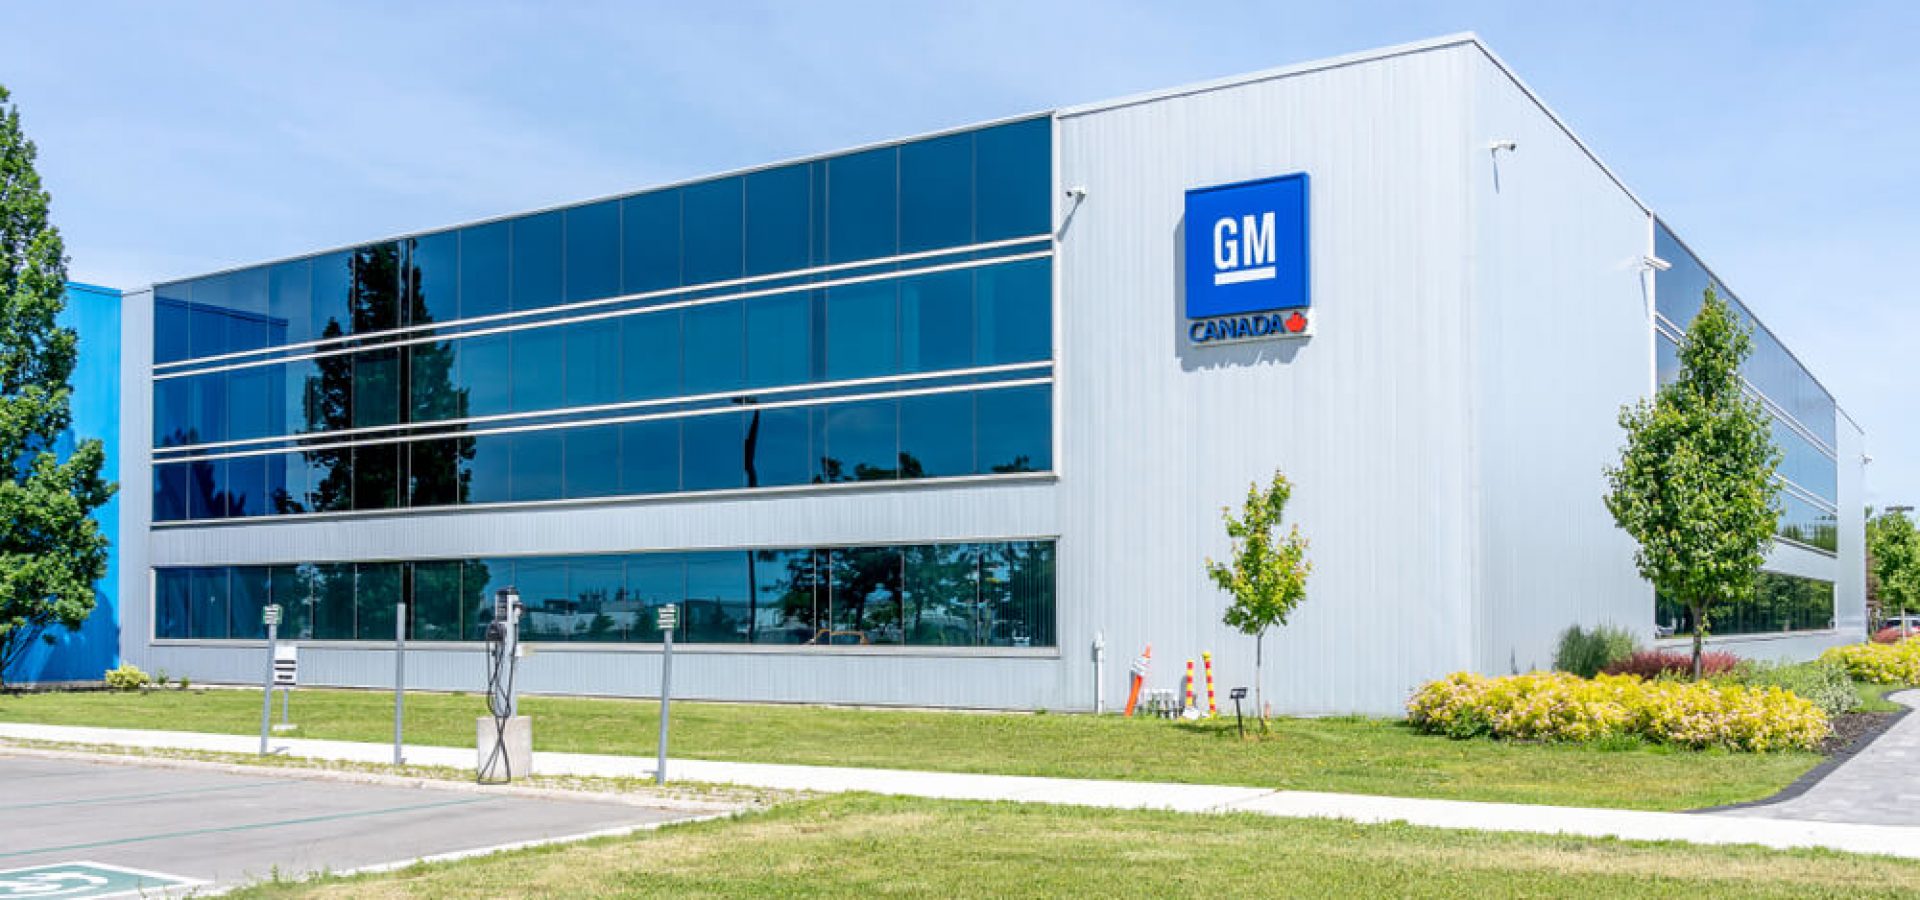 Sign of GM Canada on the building.